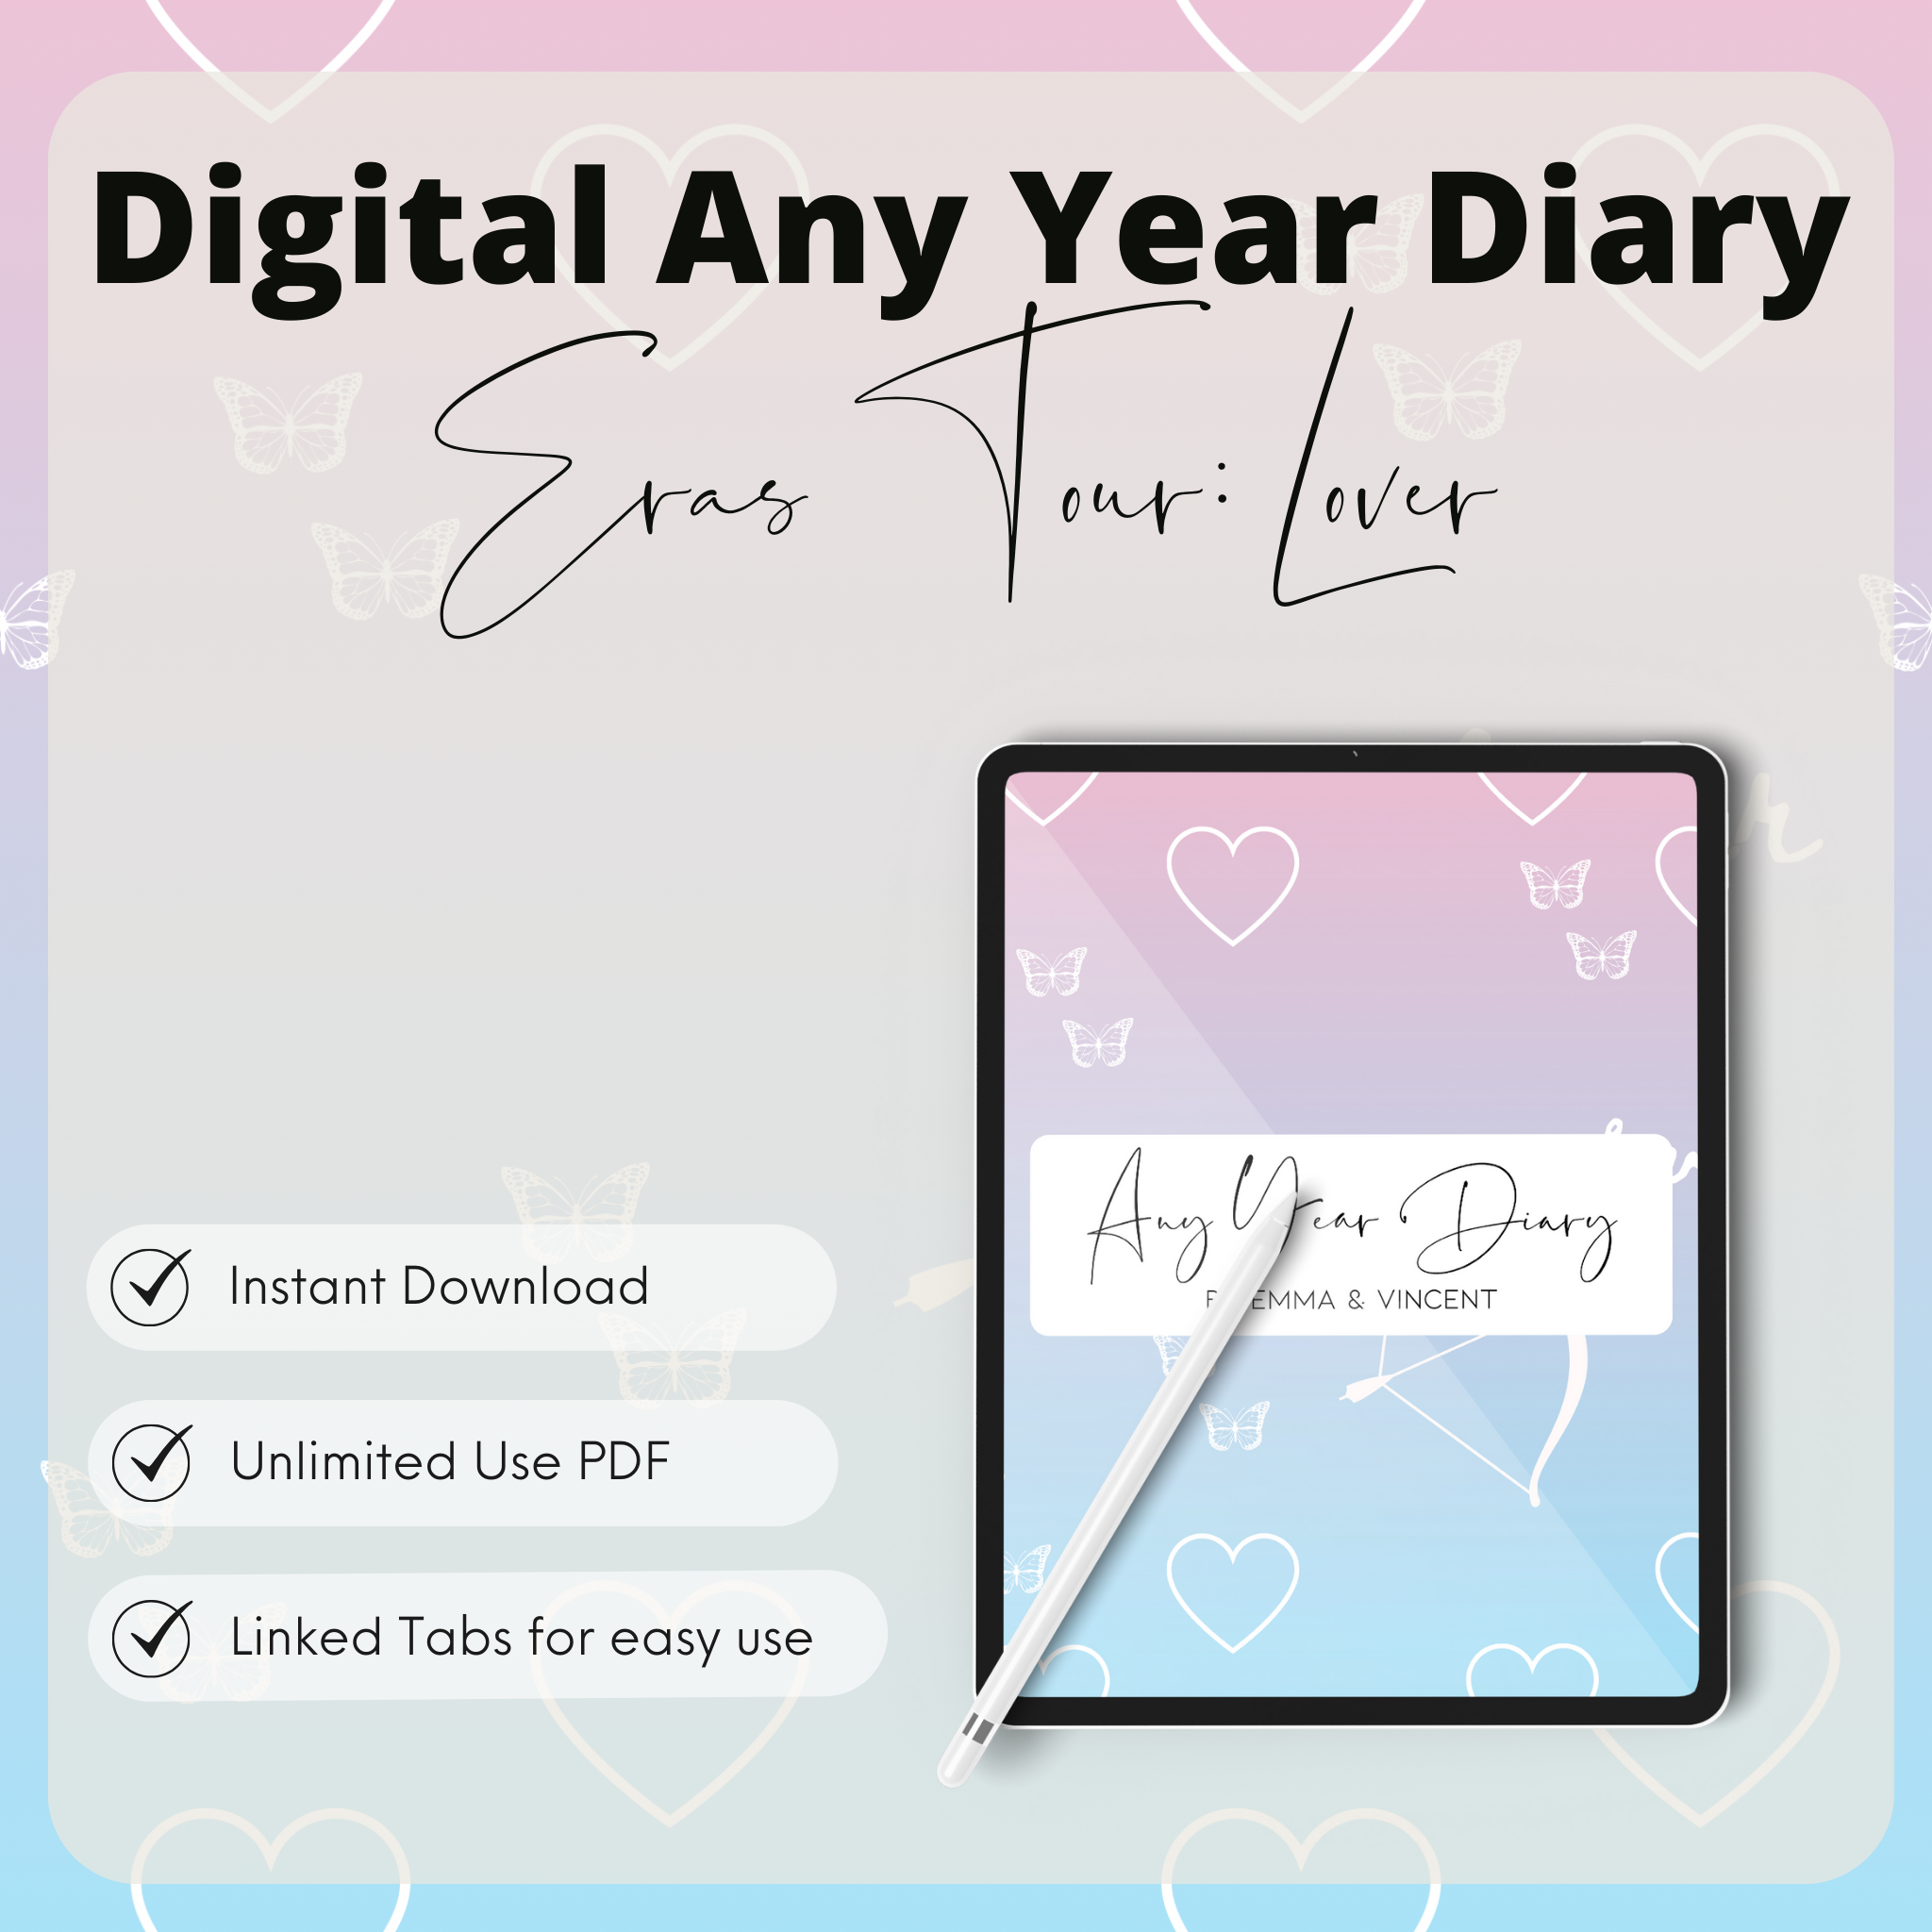 DIGITAL ANY YEAR DIARY (Lover Print - The Eras Tour)